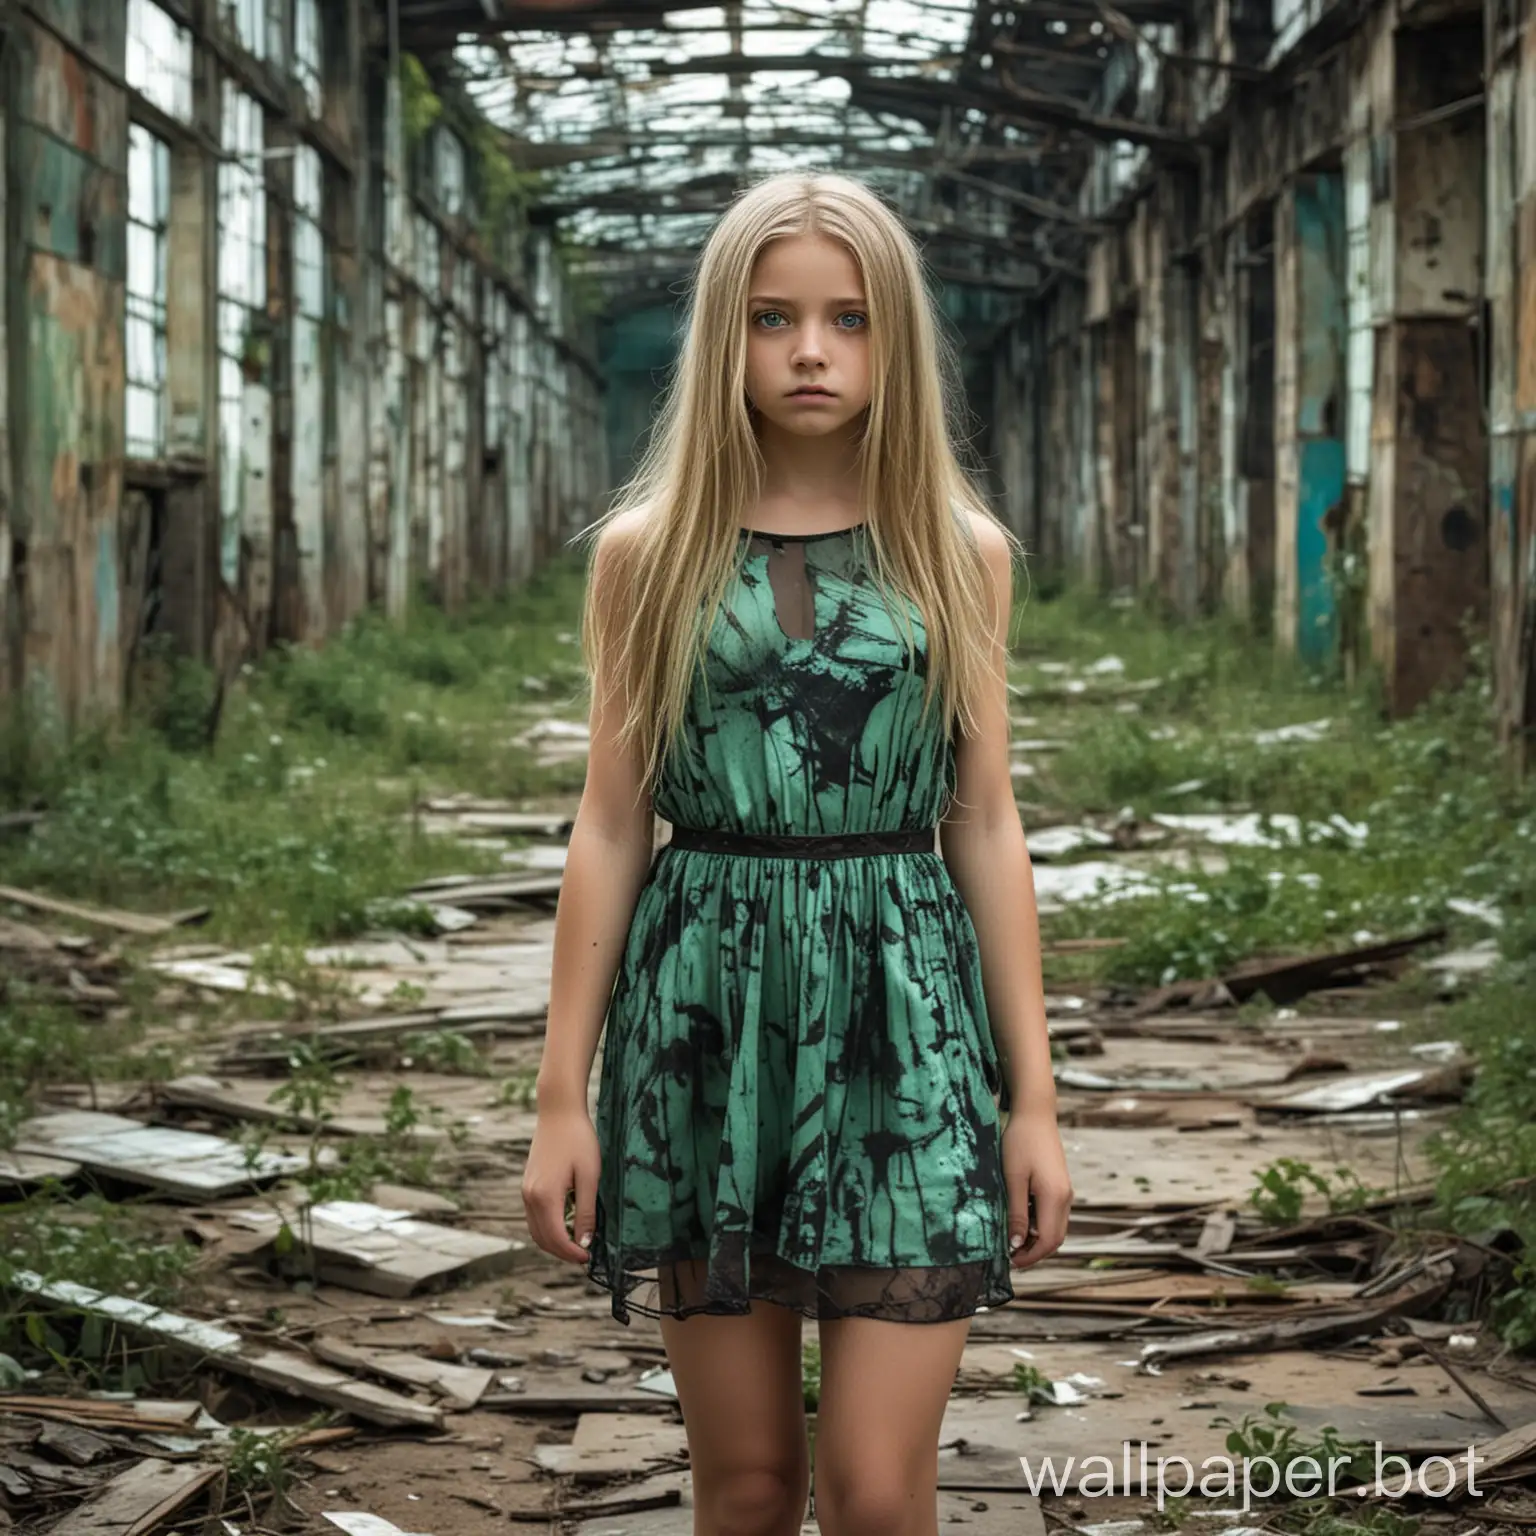 a beautiful girl, age about 12, long blonde straight hair, green eyes, She is wearing a semi-transparent short dress, She is in an abandoned futuristic landscape, she looks desperate